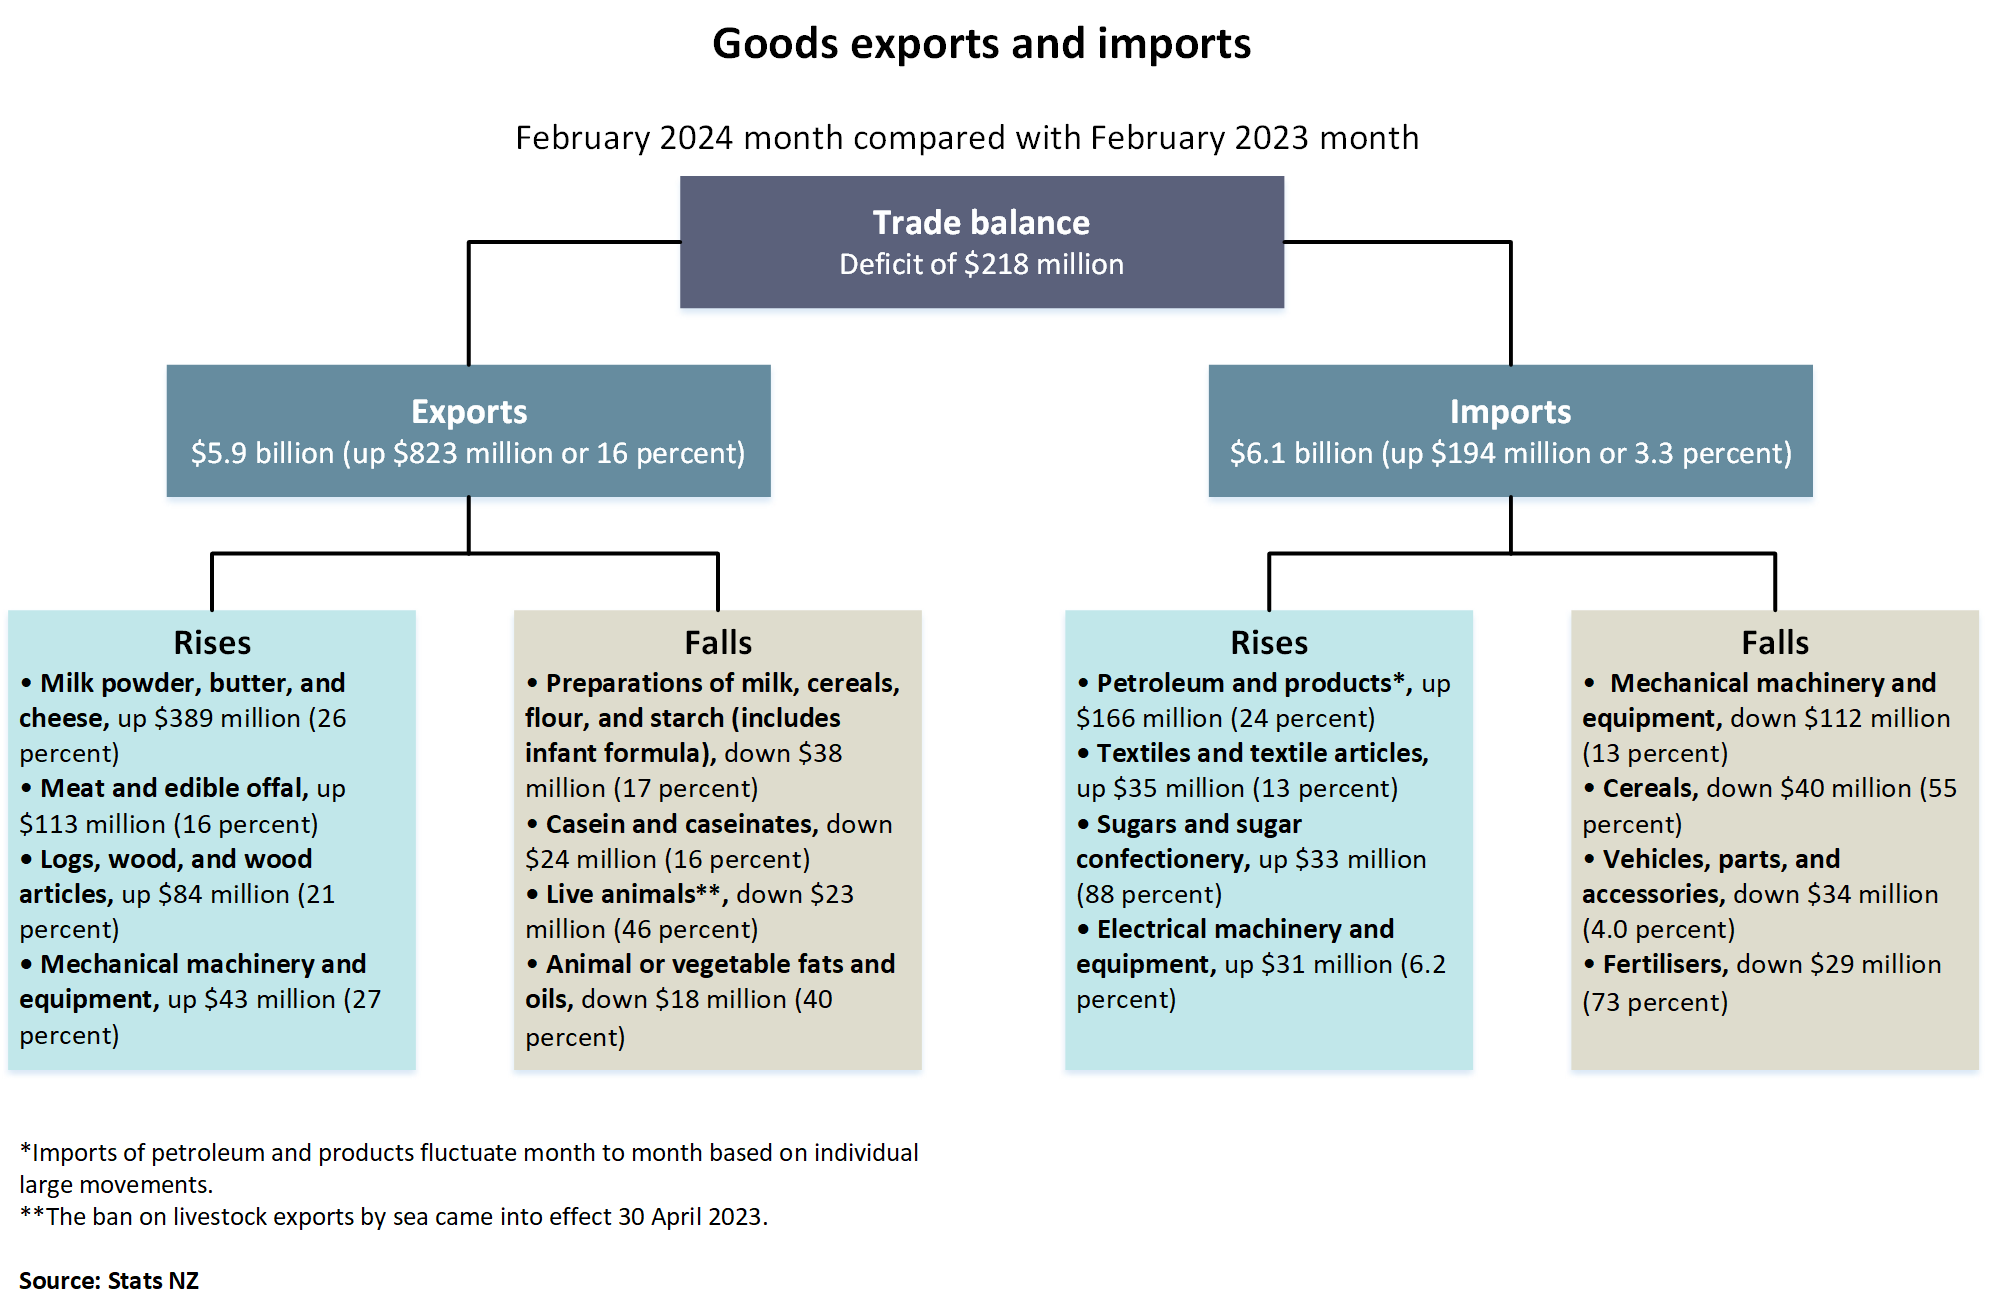 Diagram showing goods exports and imports, February 2024 month compared with February 2023 month. Text alternative available below diagram.